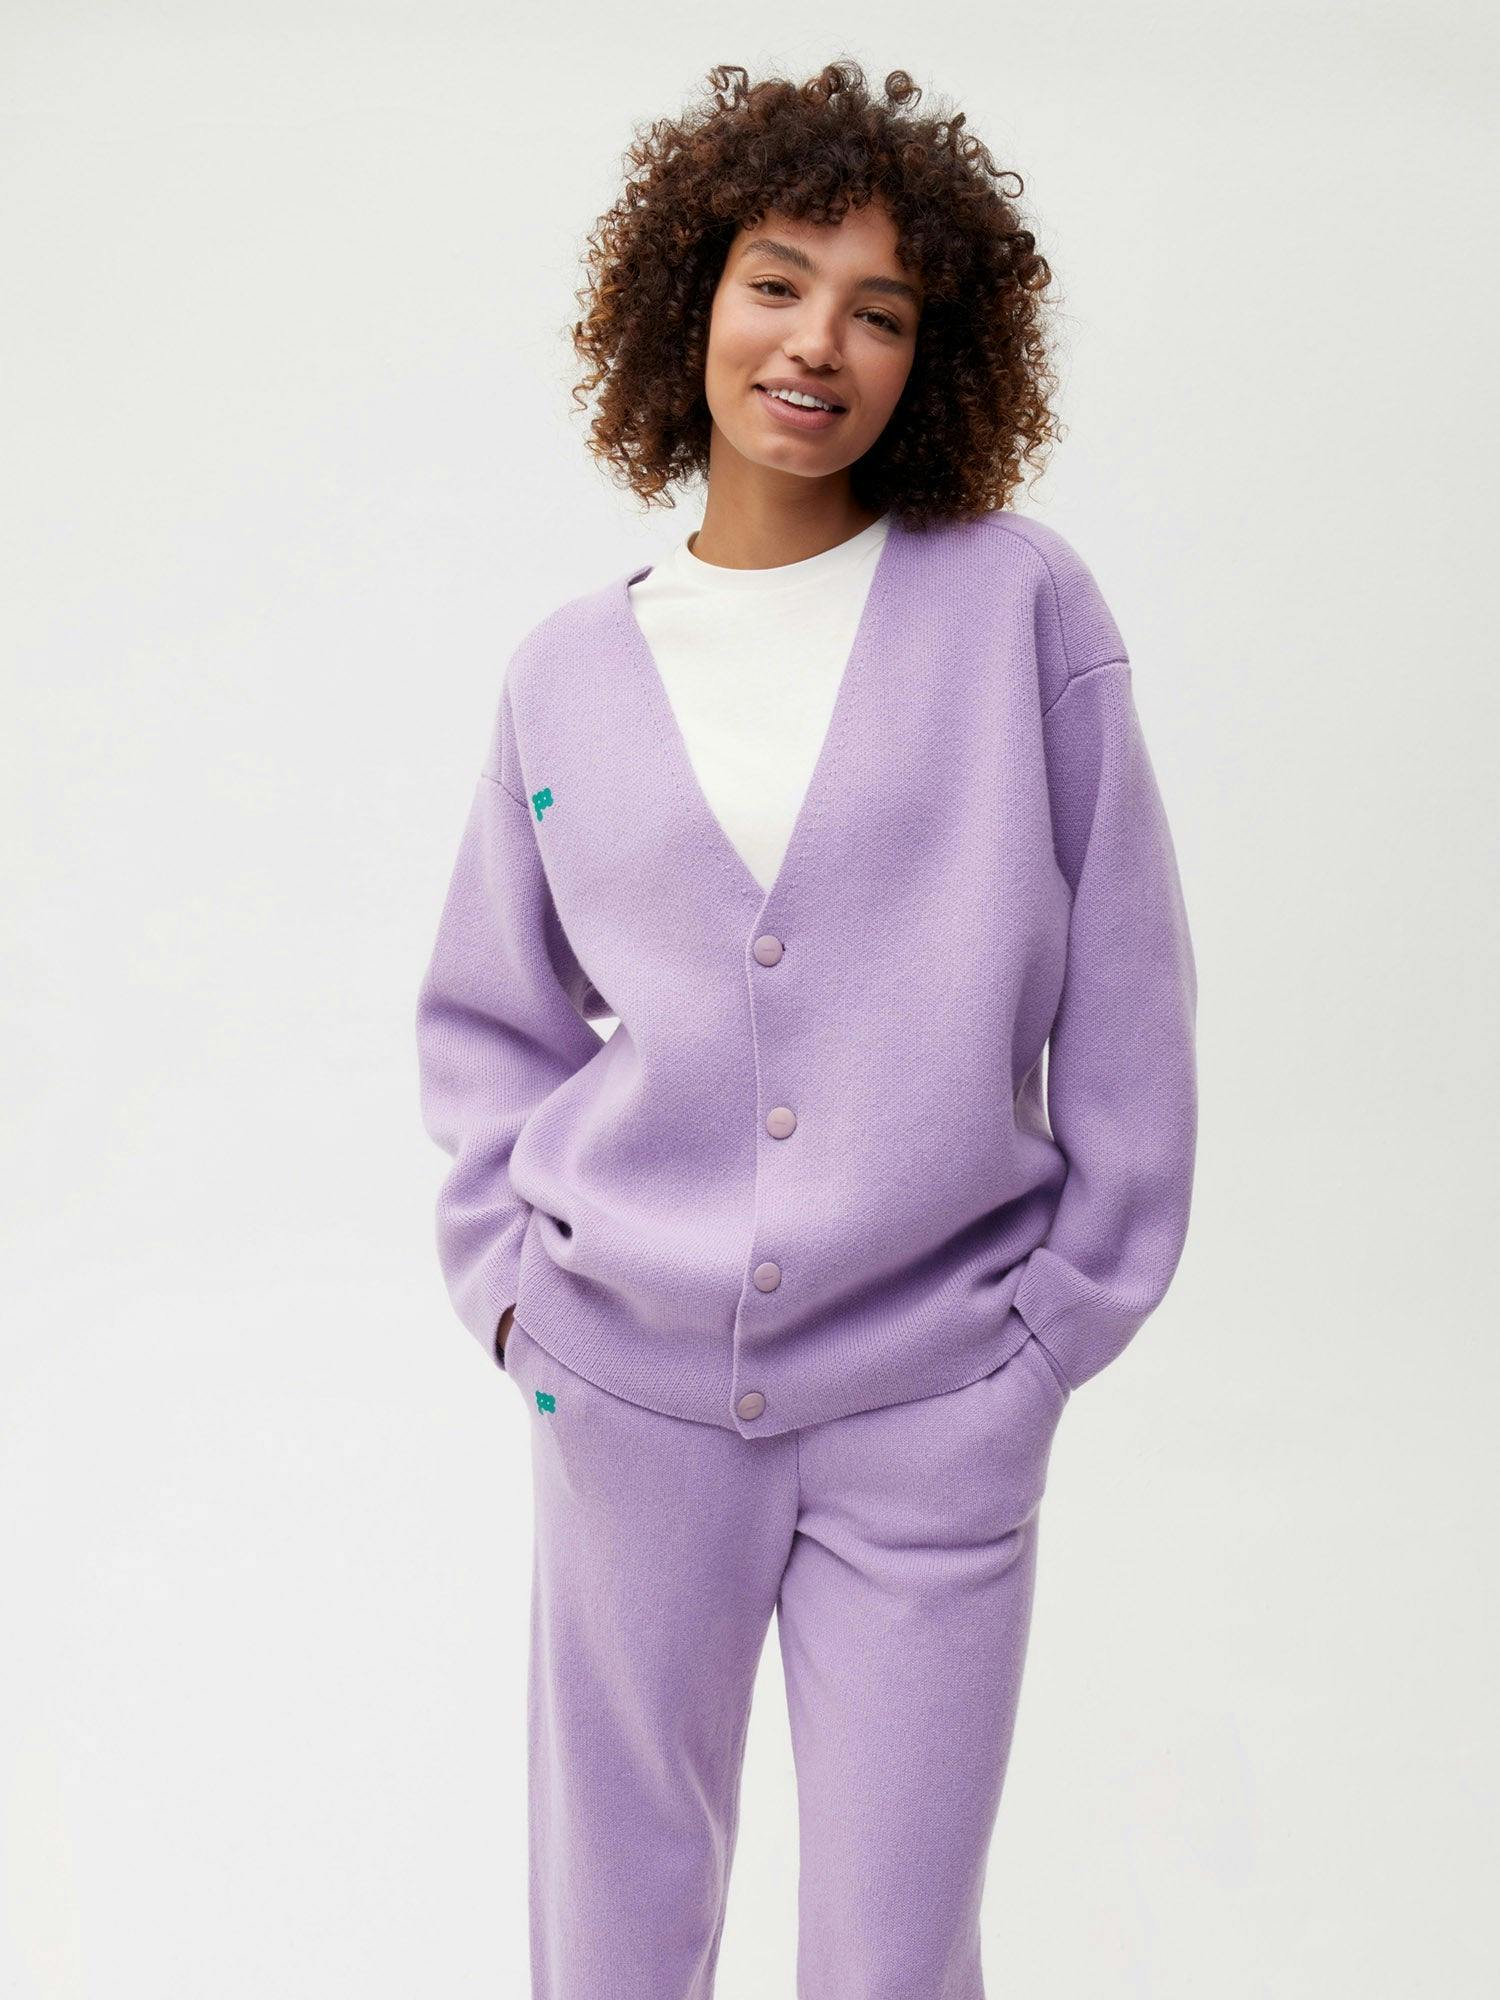 https://cdn.shopify.com/s/files/1/0035/1309/0115/products/Cashmere-Cardigan-Orchid-Purple-Female-1.jpg?v=1662476029